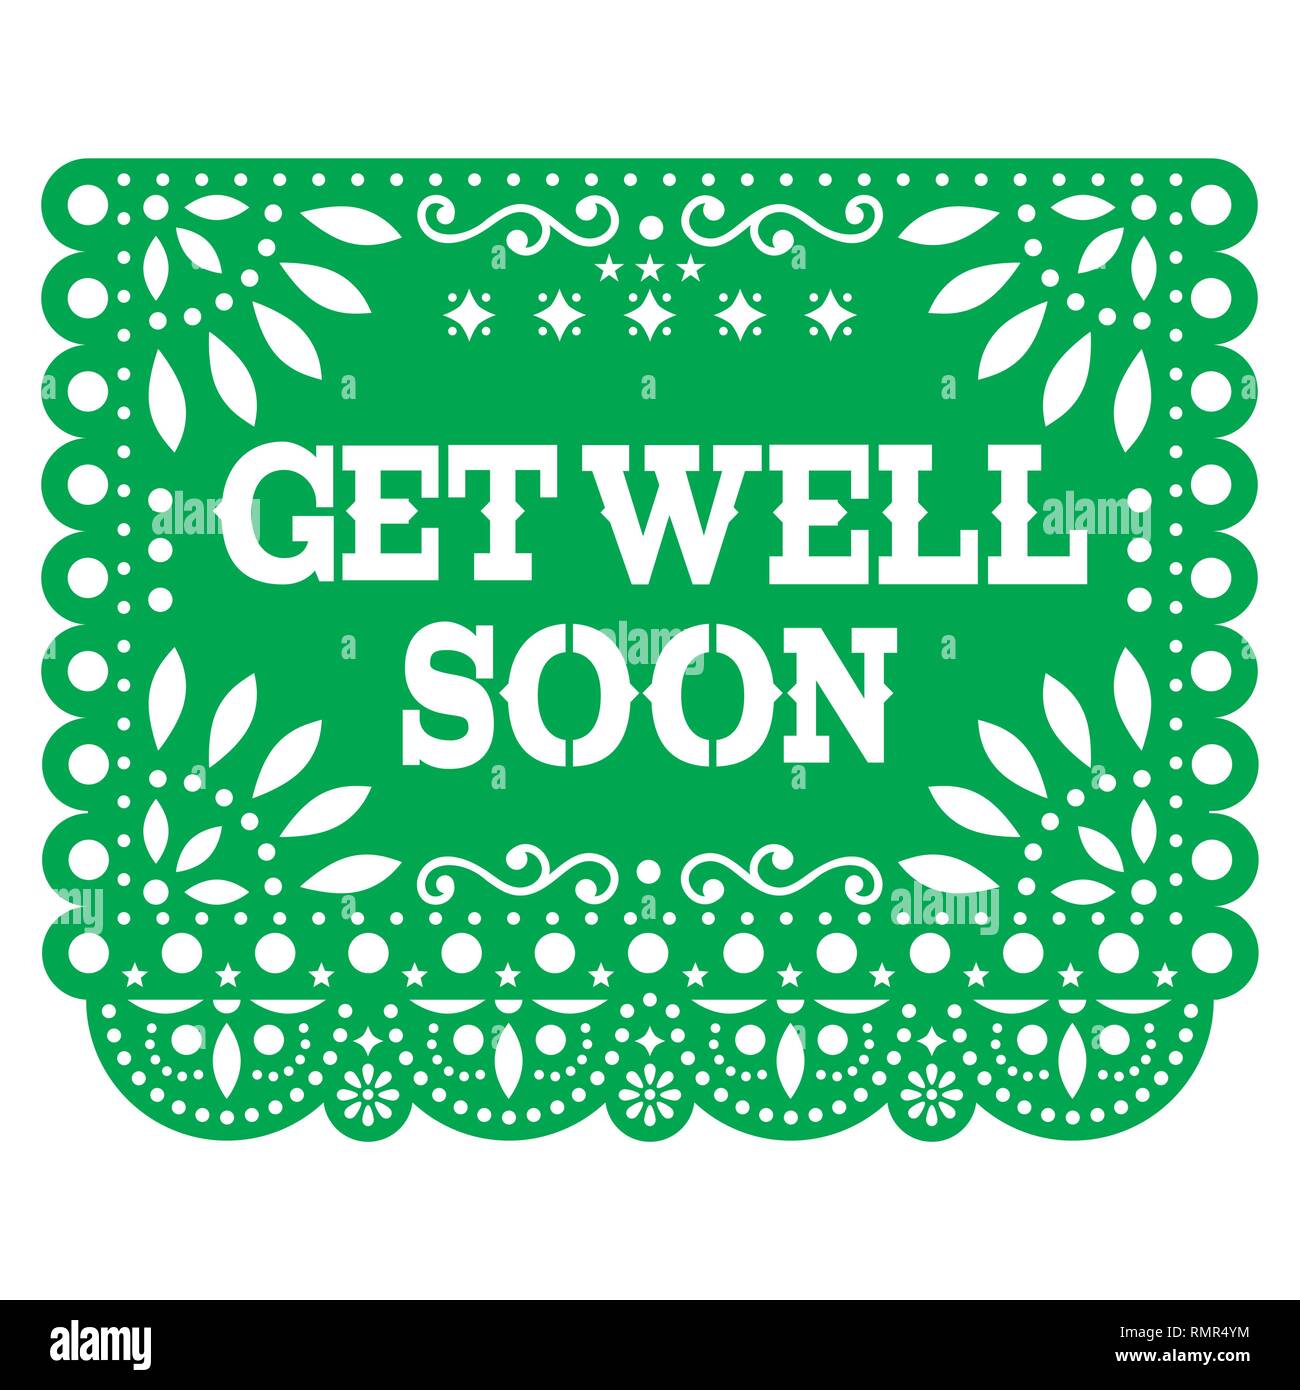 Vector Hand Drawn Postcard “Get Well” With Cute Cartoon Style Sick